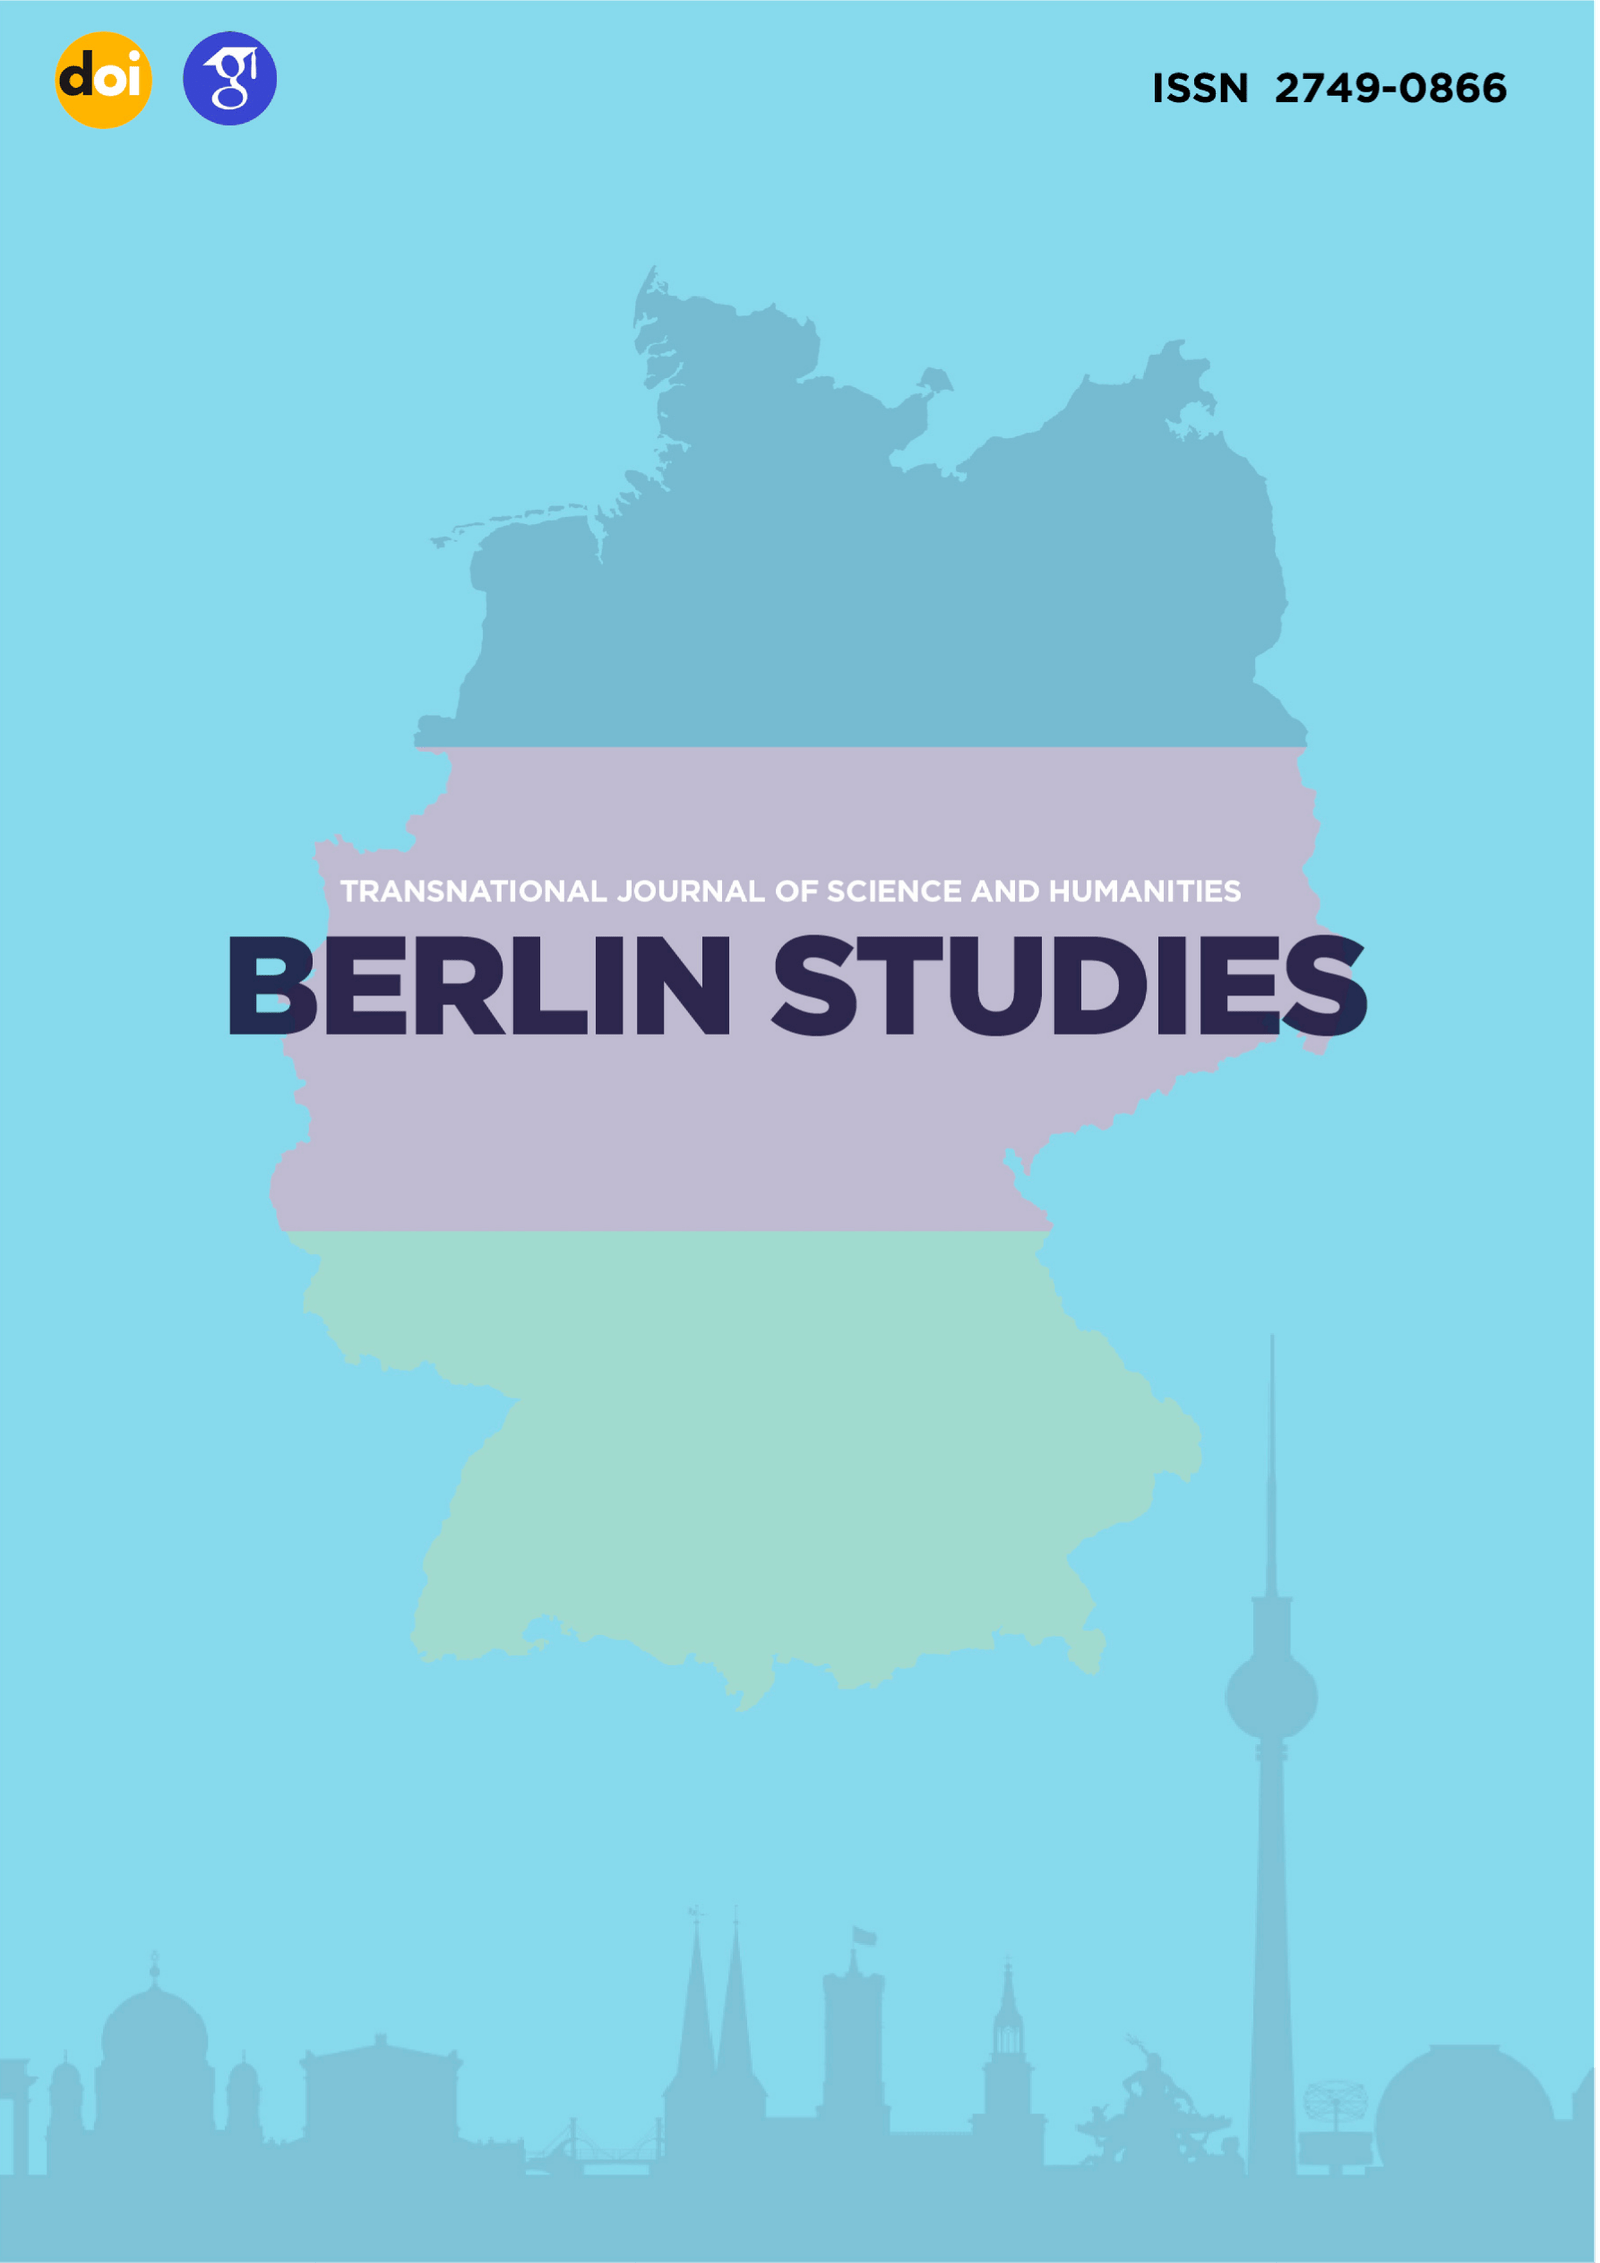 					View Vol. 3 No. 1.7 Philosophical sciences (2023): Berlin Studies Transnational Journal of Science and Humanities
				